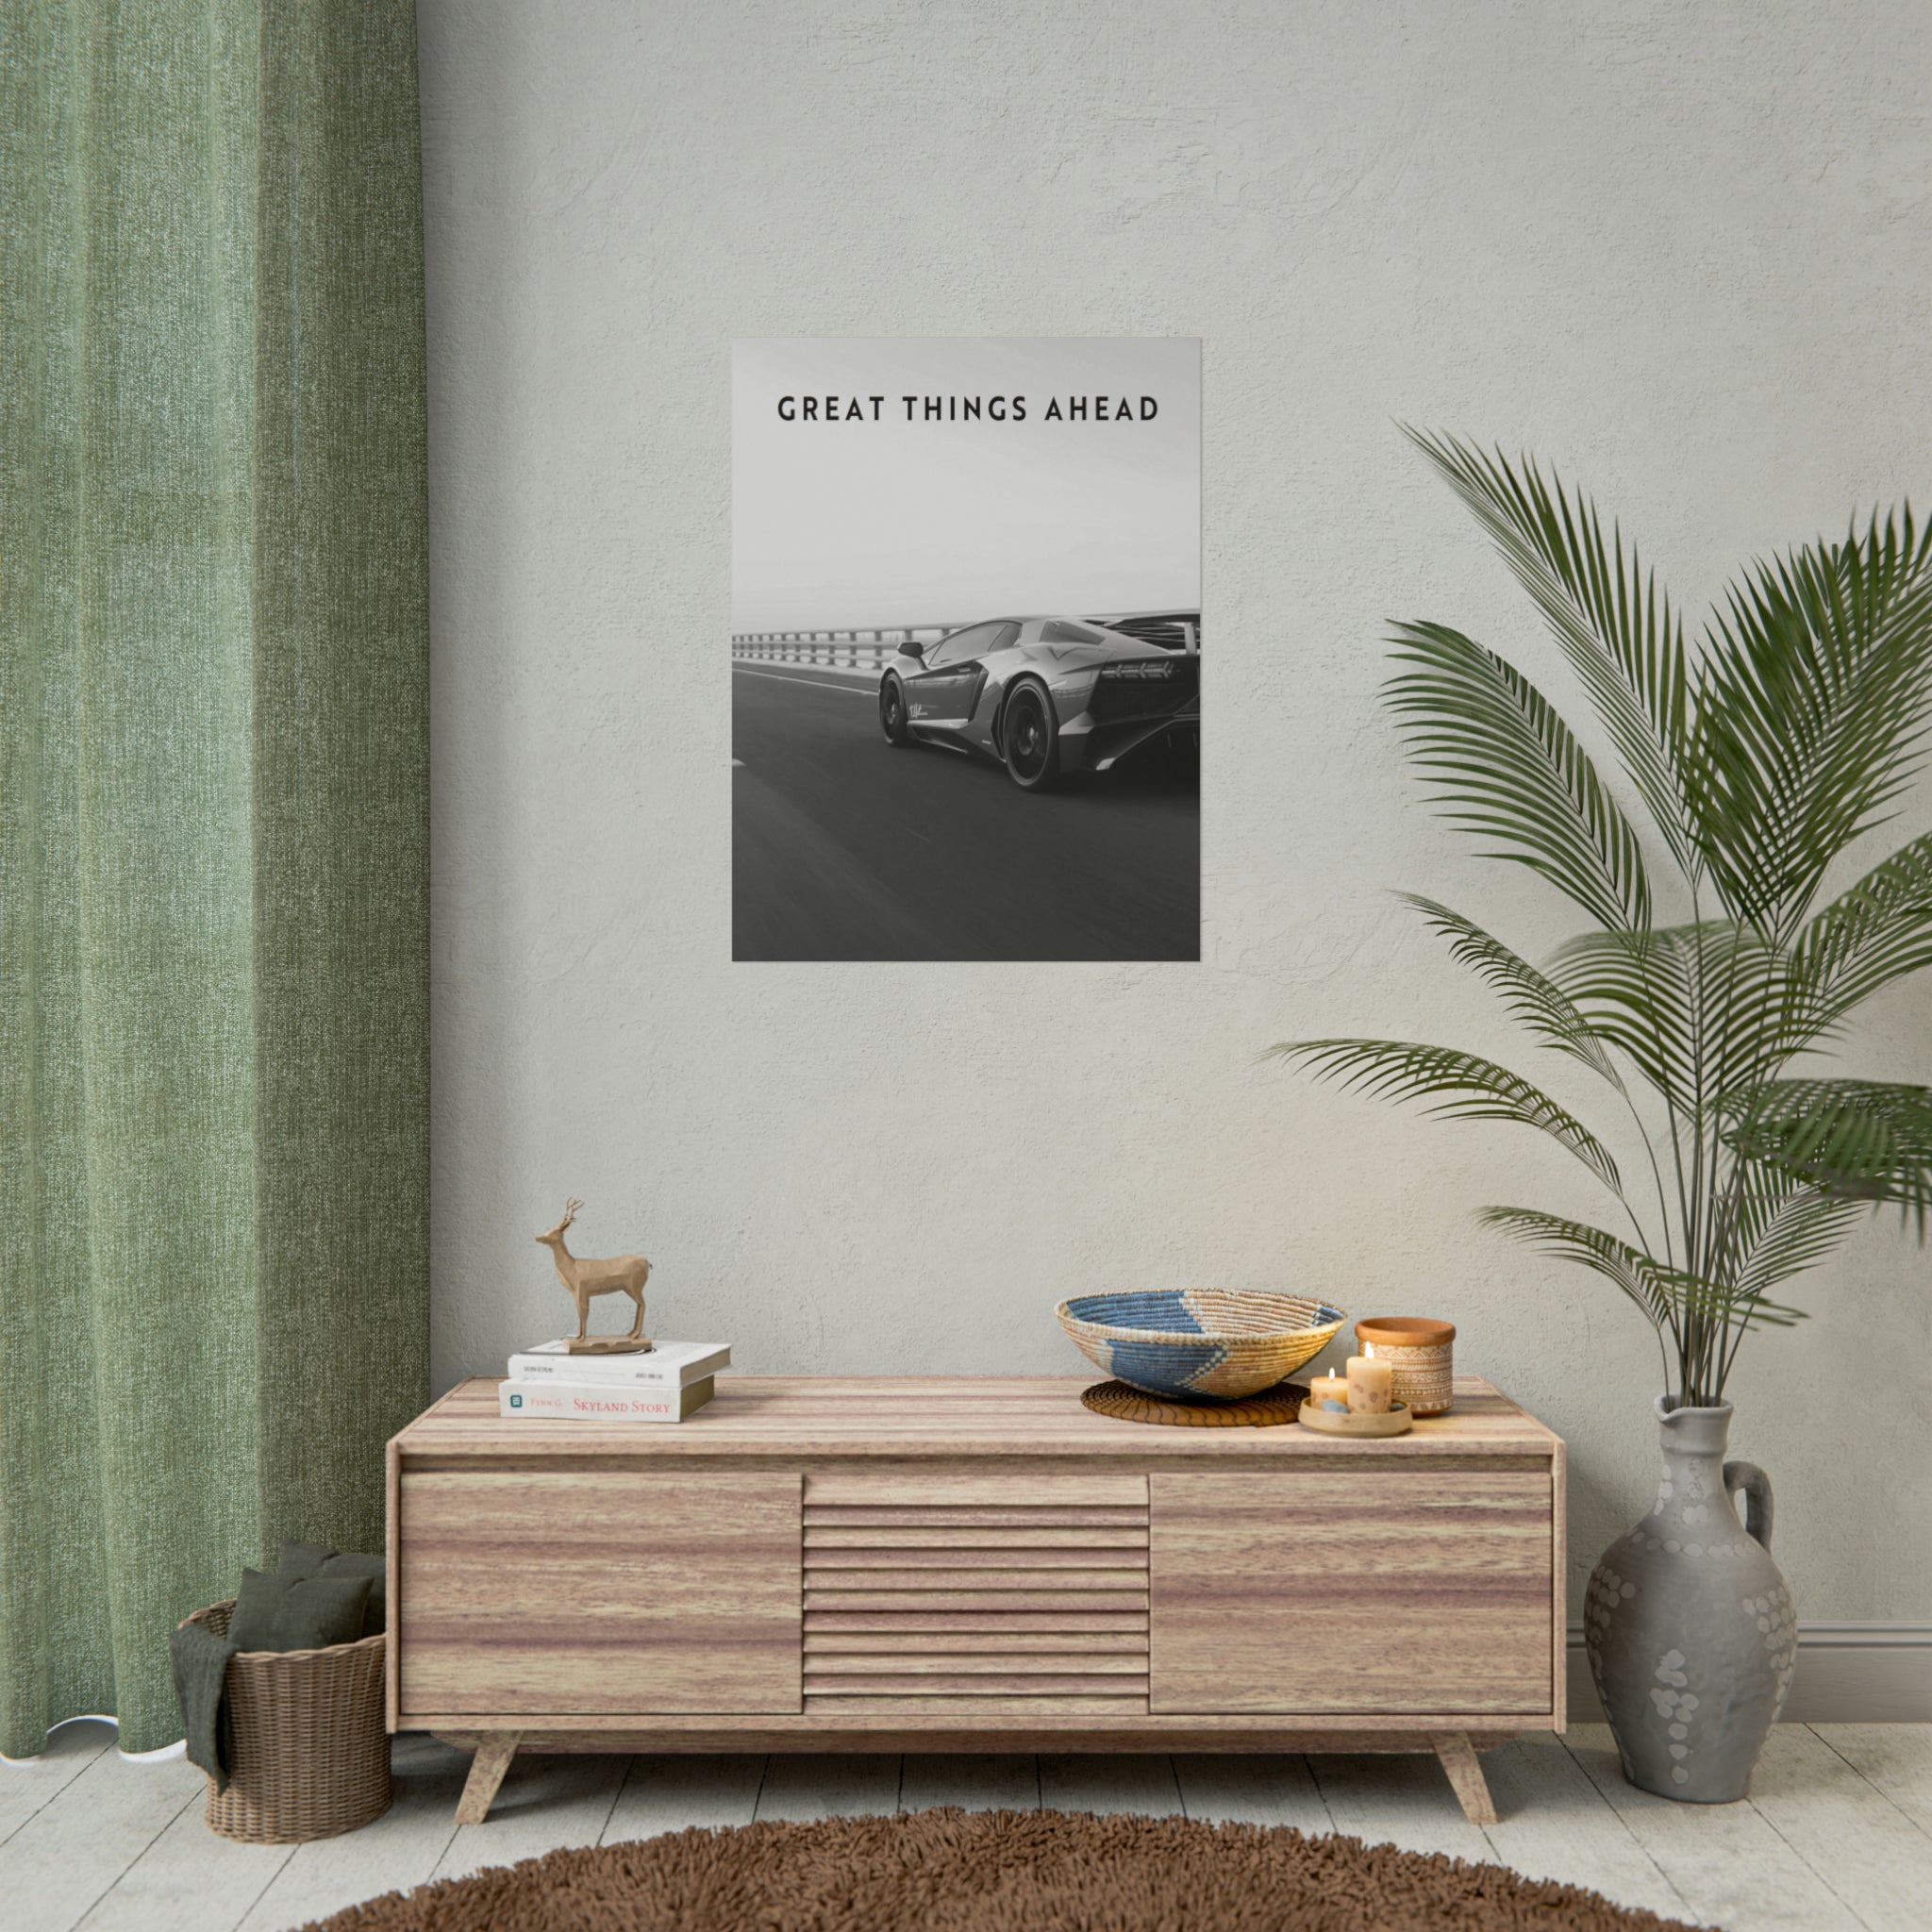 Great Things Ahead - Sports Car Black And White - Poster additional image 2